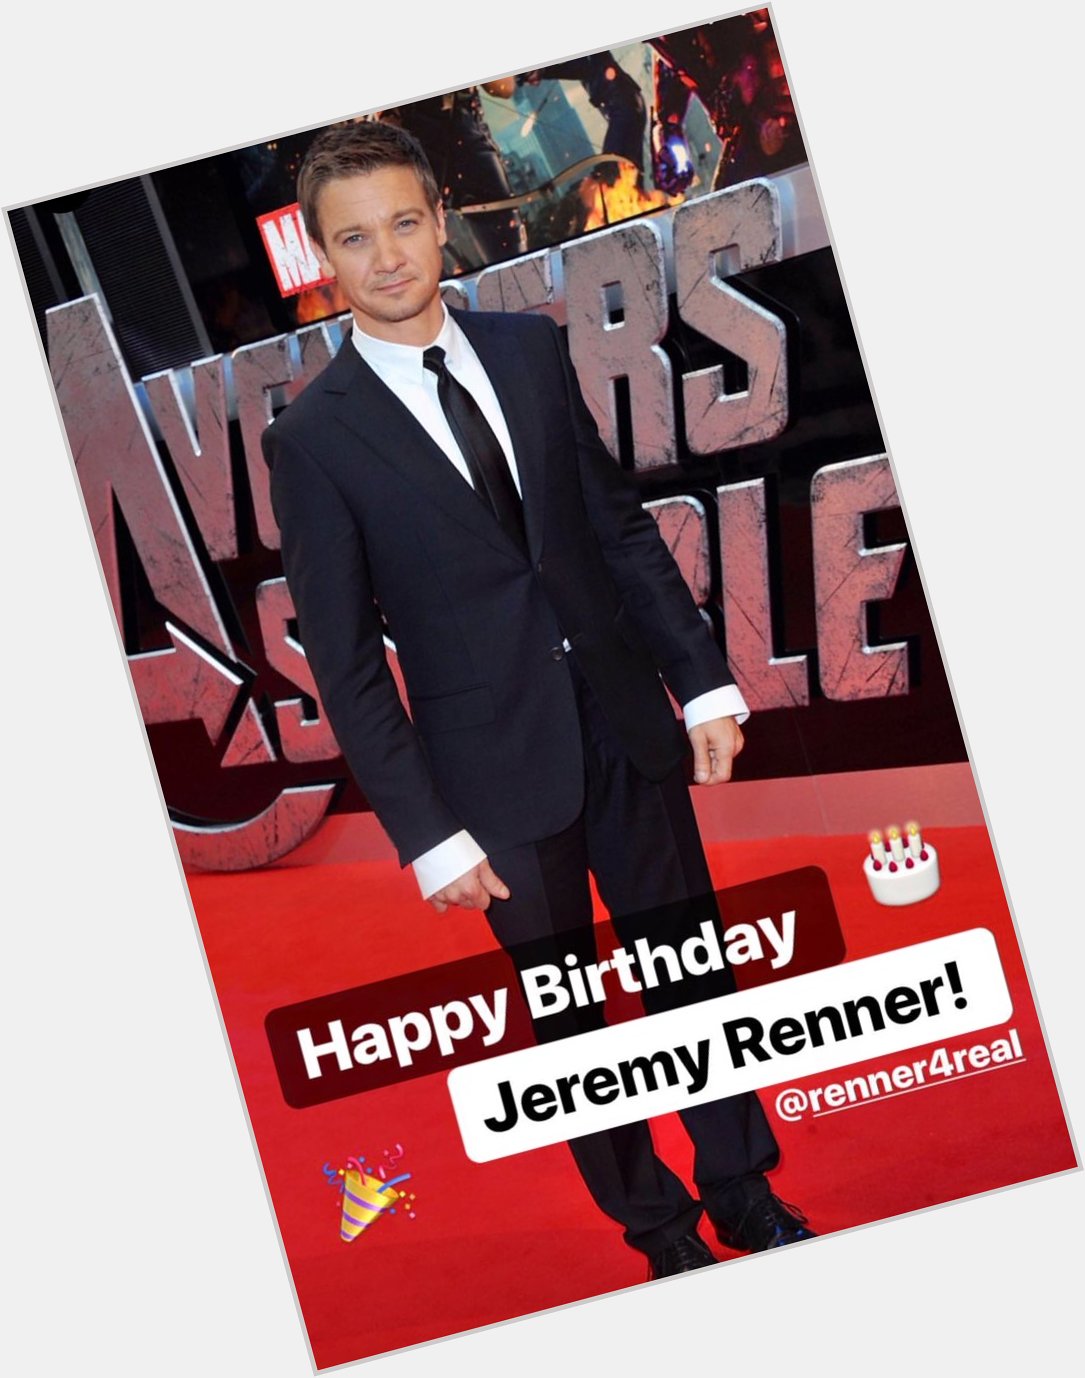 Happy birthday Jeremy Renner!!! Hope you are having the best day! 